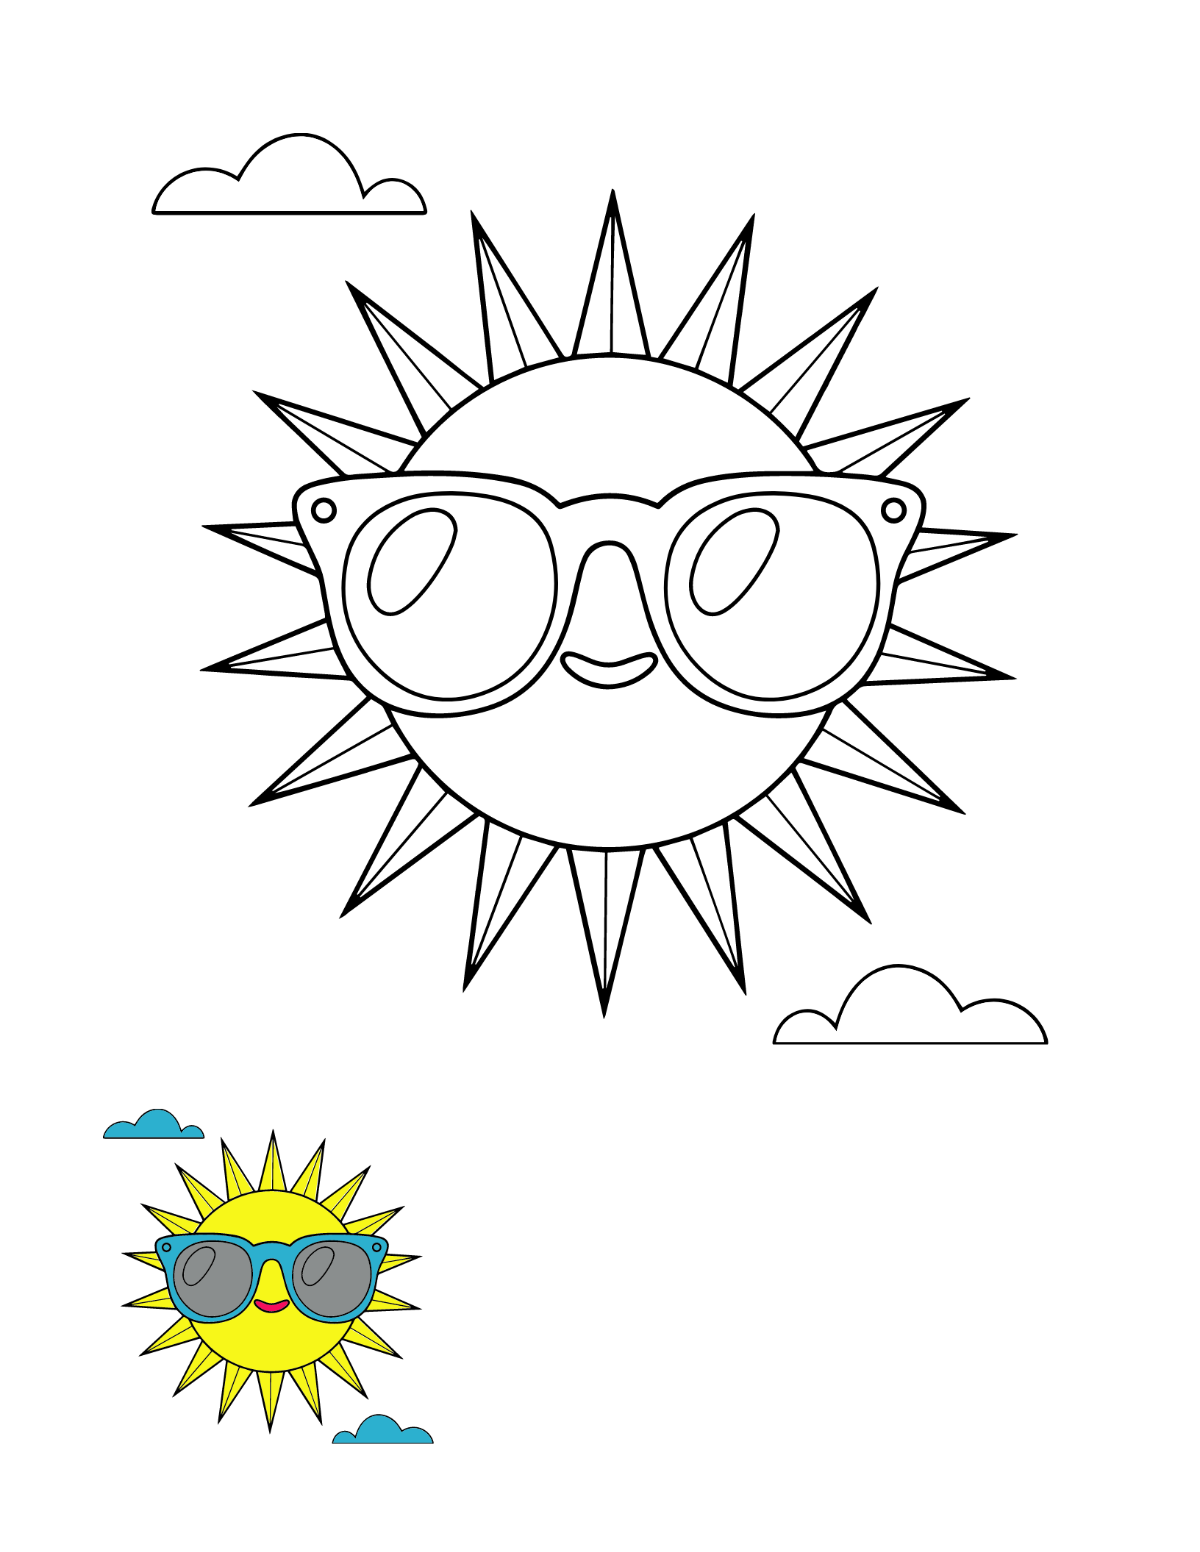 Happy Summer Coloring Page Template